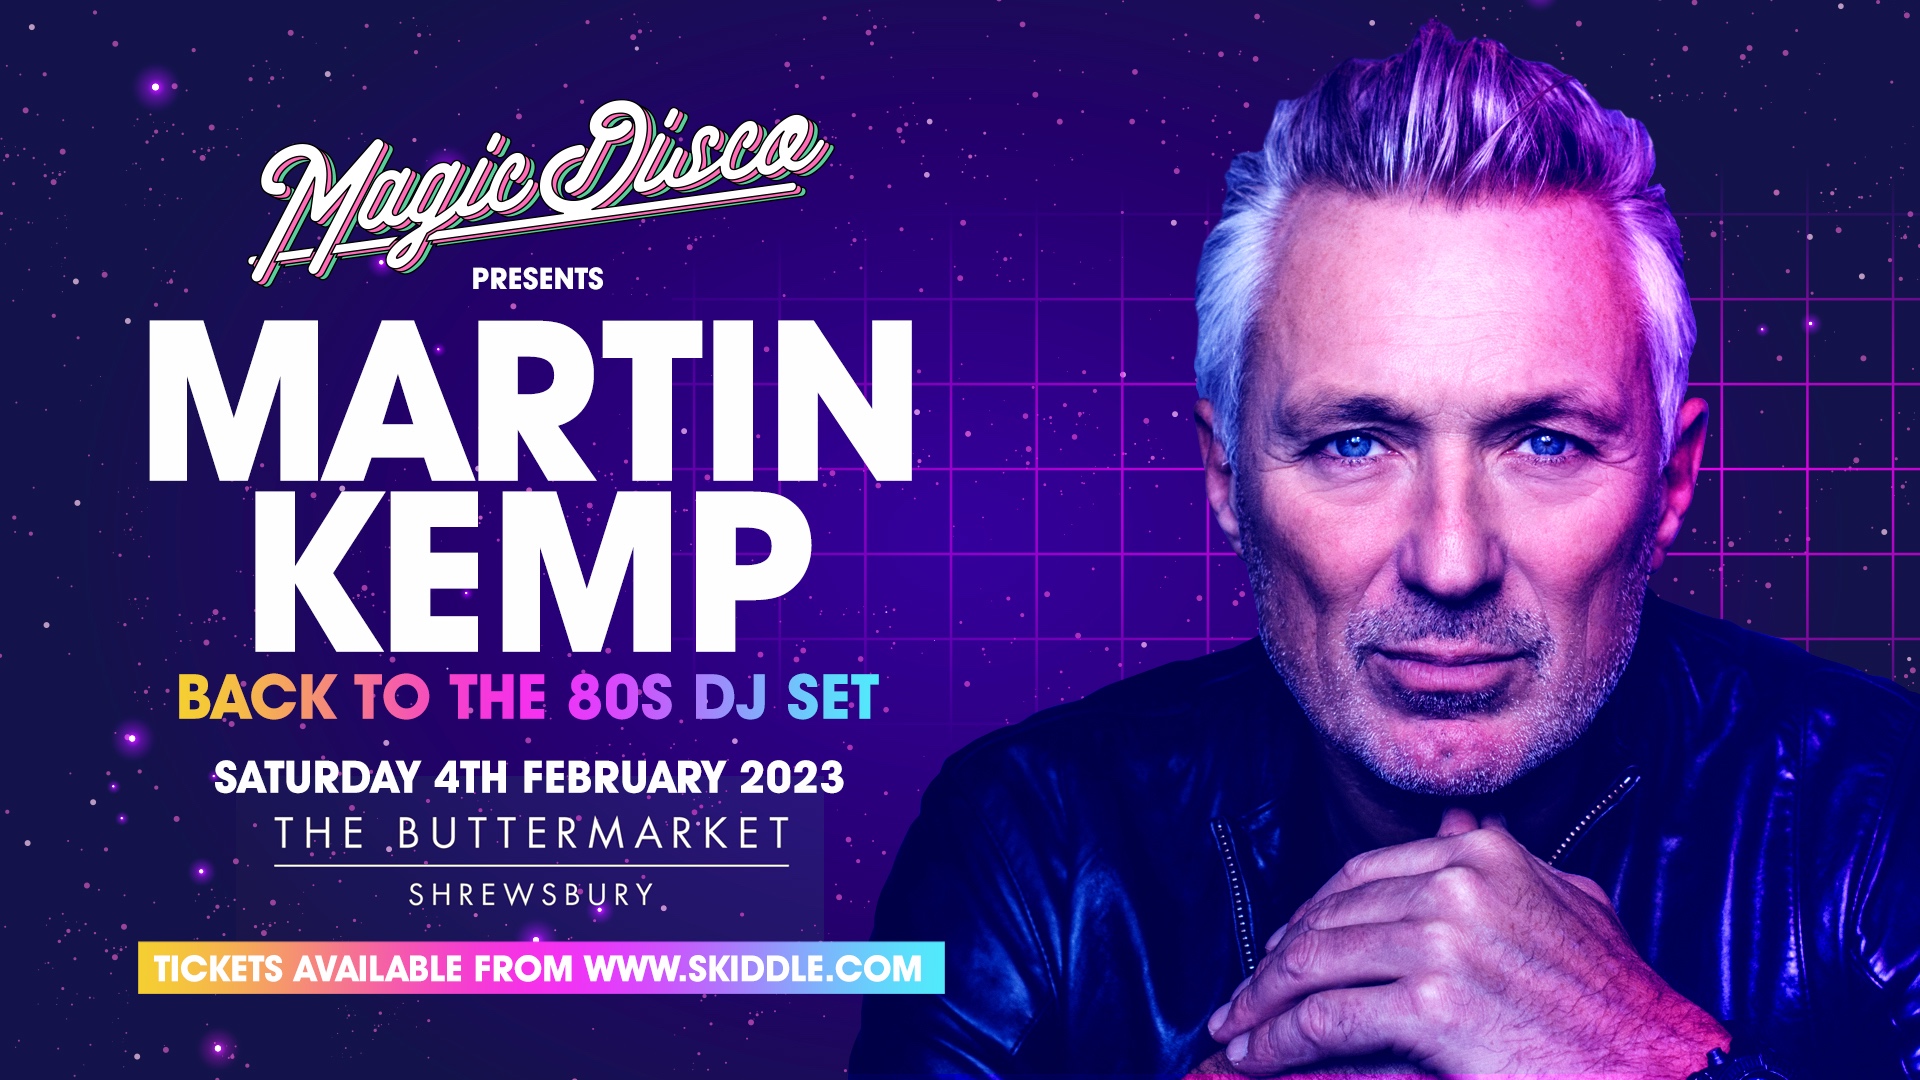 Martin Kemp: The ULTIMATE back to the 80’s DJ set – presented by Magic Disco live